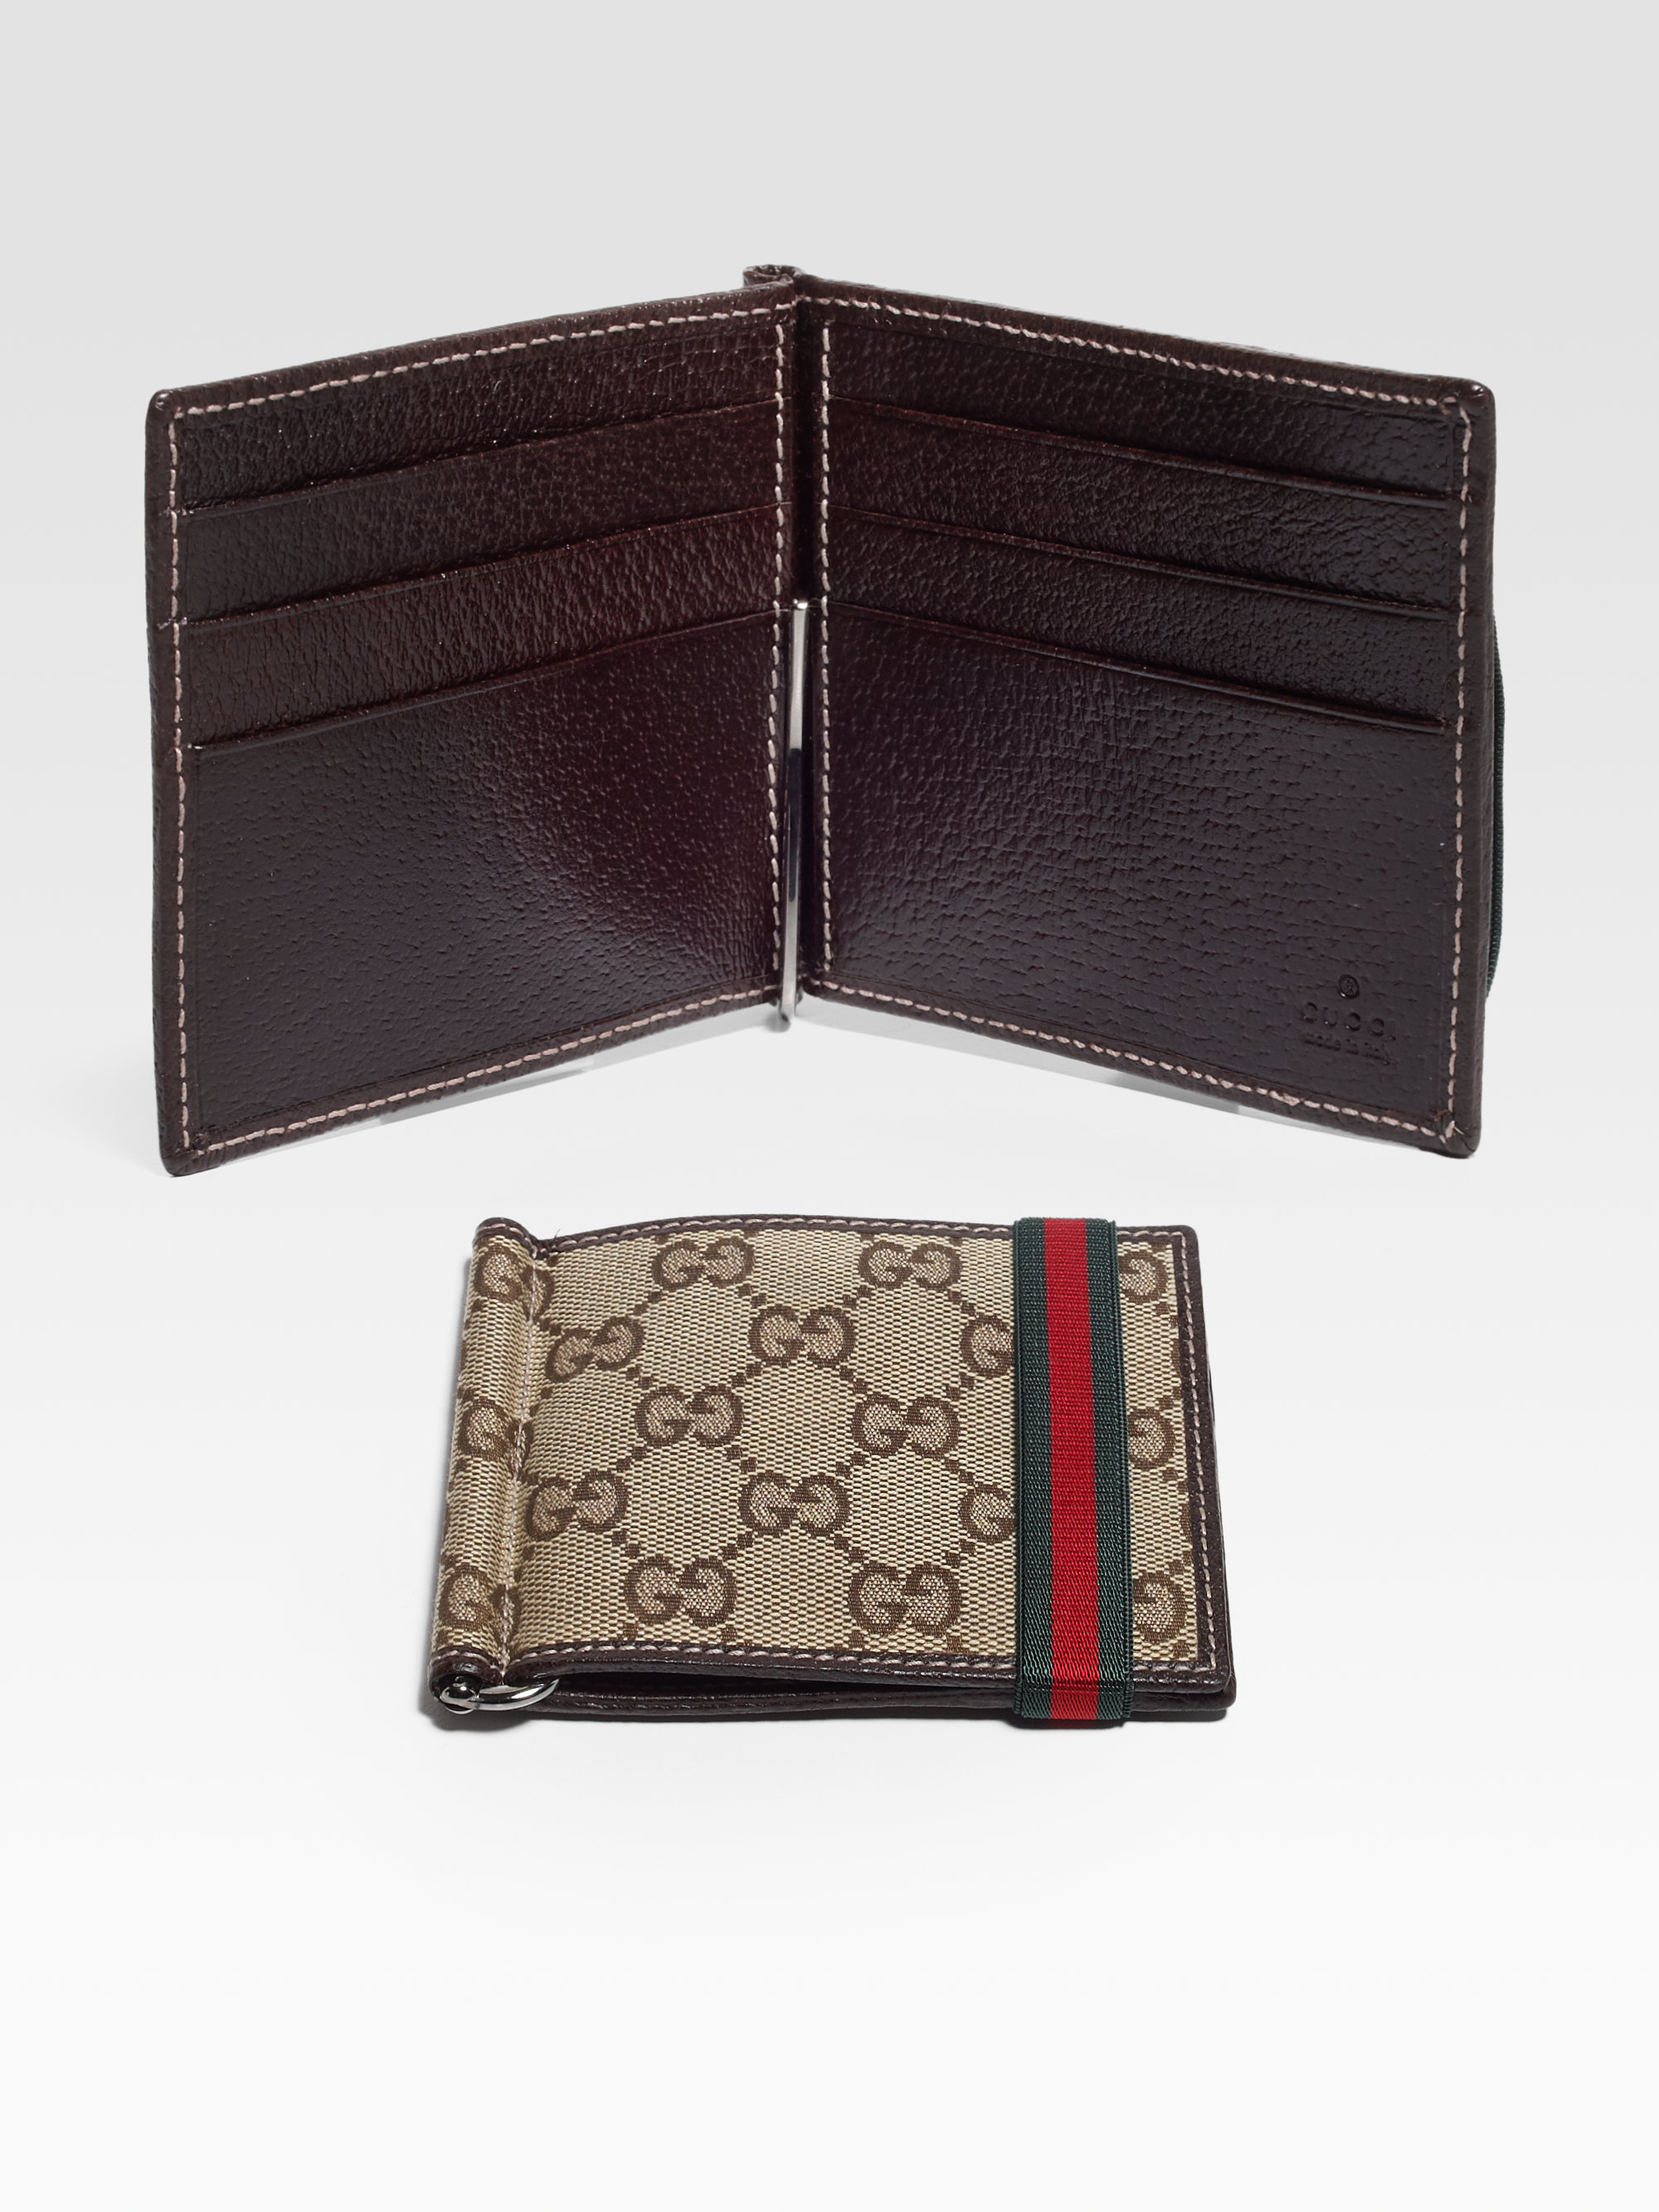  Gucci  Money Clip Wallet  in Natural for Men  Lyst